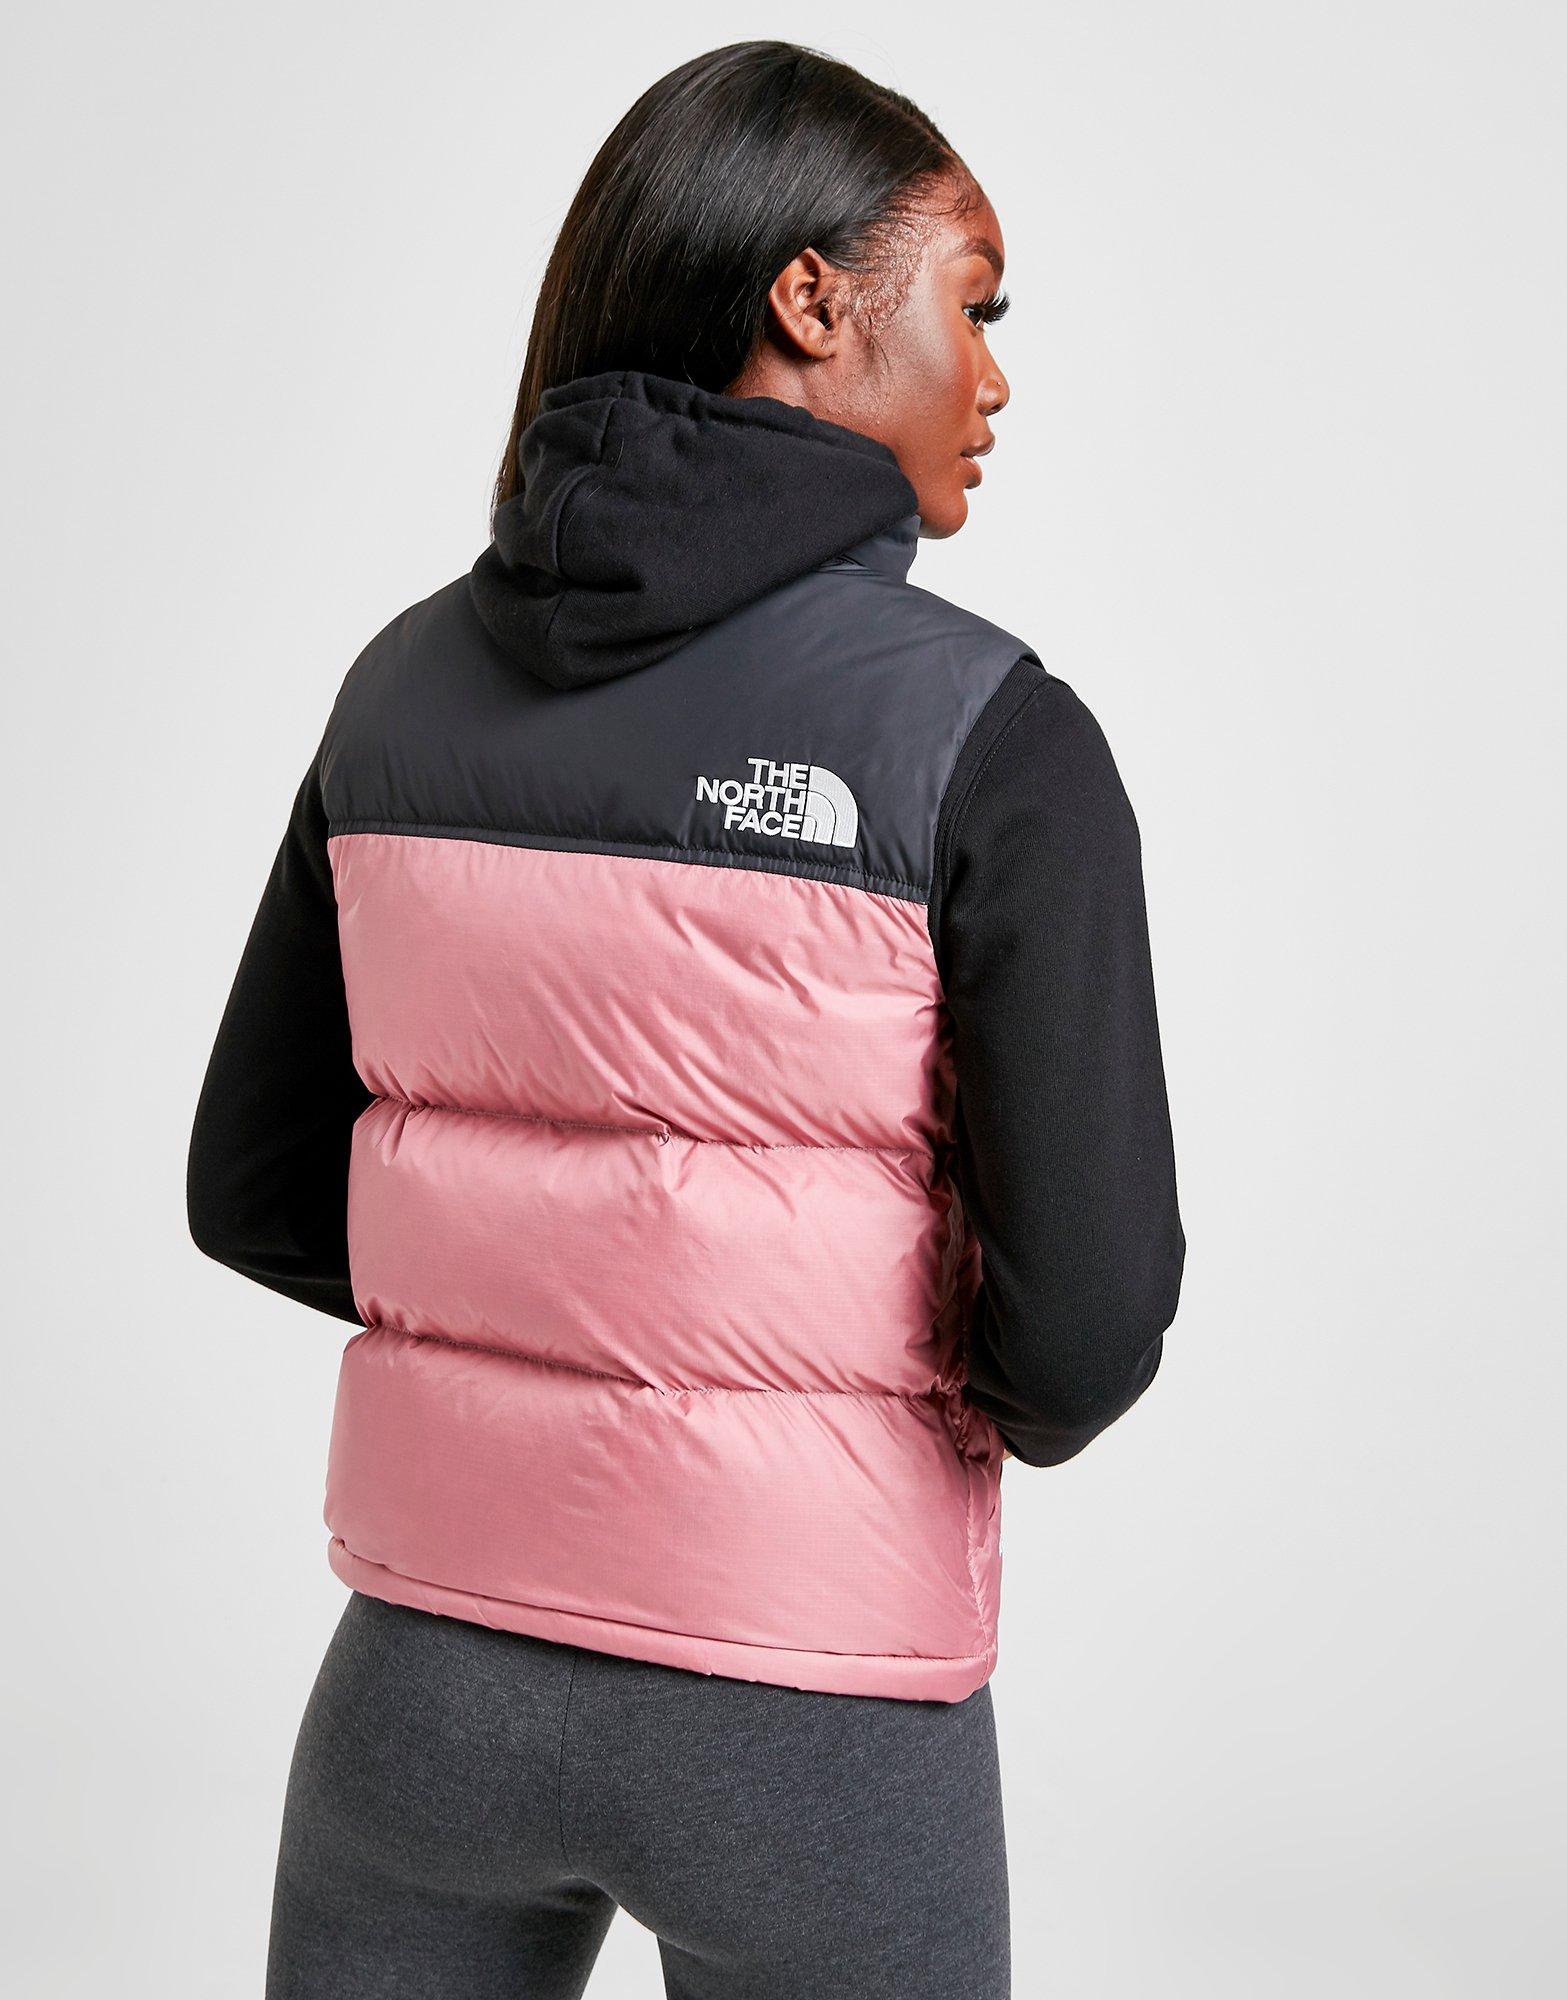 north face gilet 700 womens